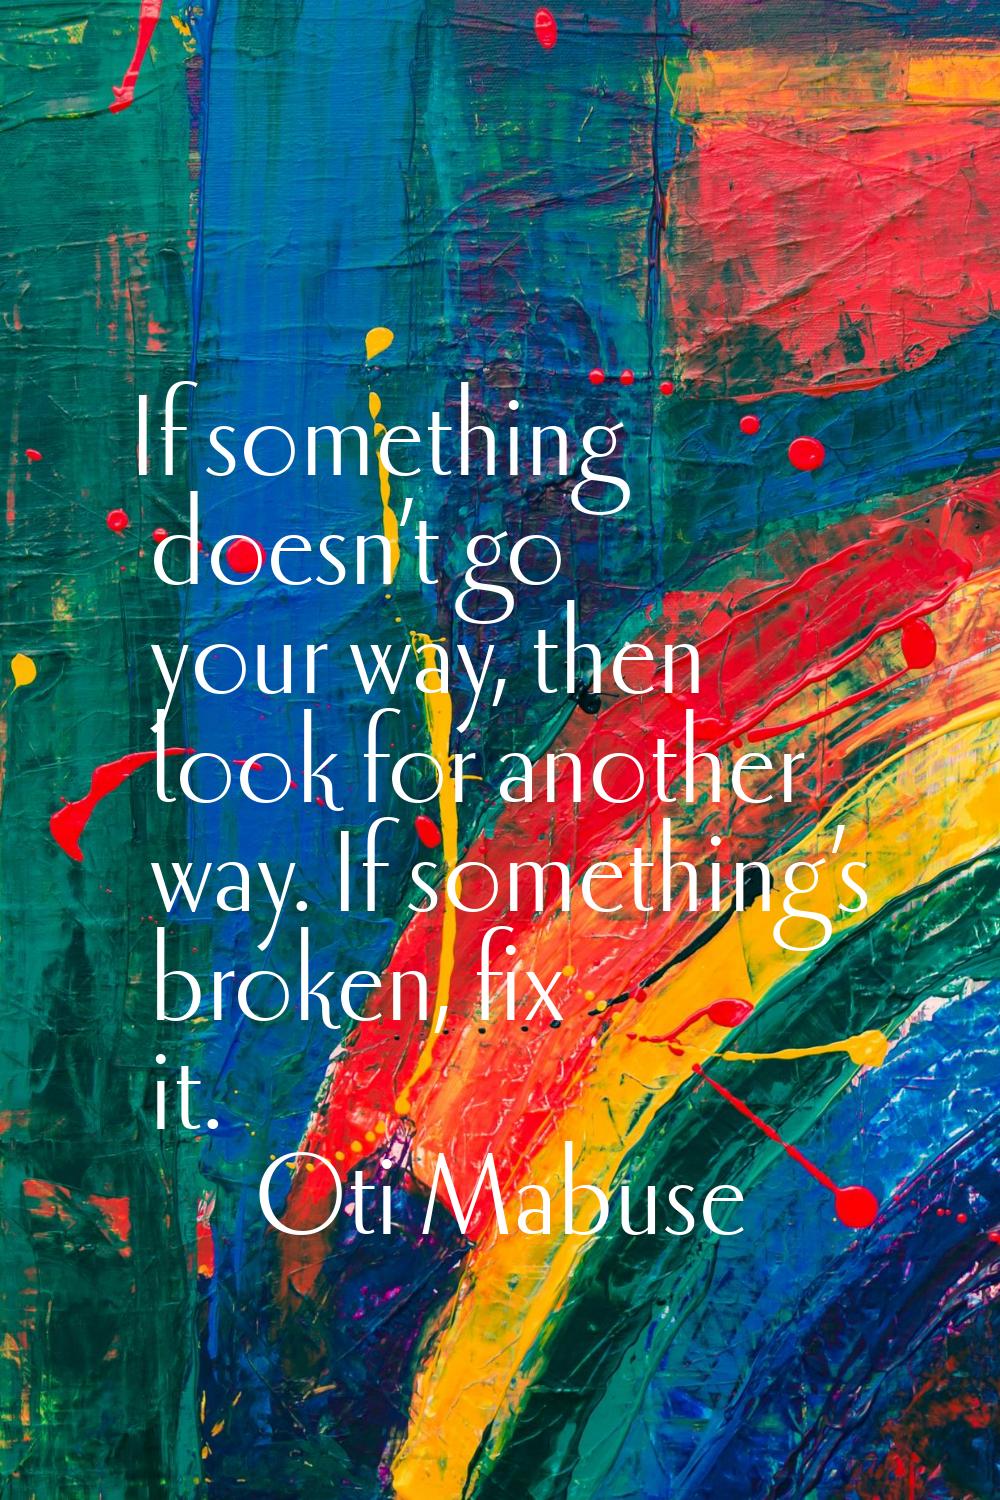 If something doesn’t go your way, then look for another way. If something’s broken, fix it.